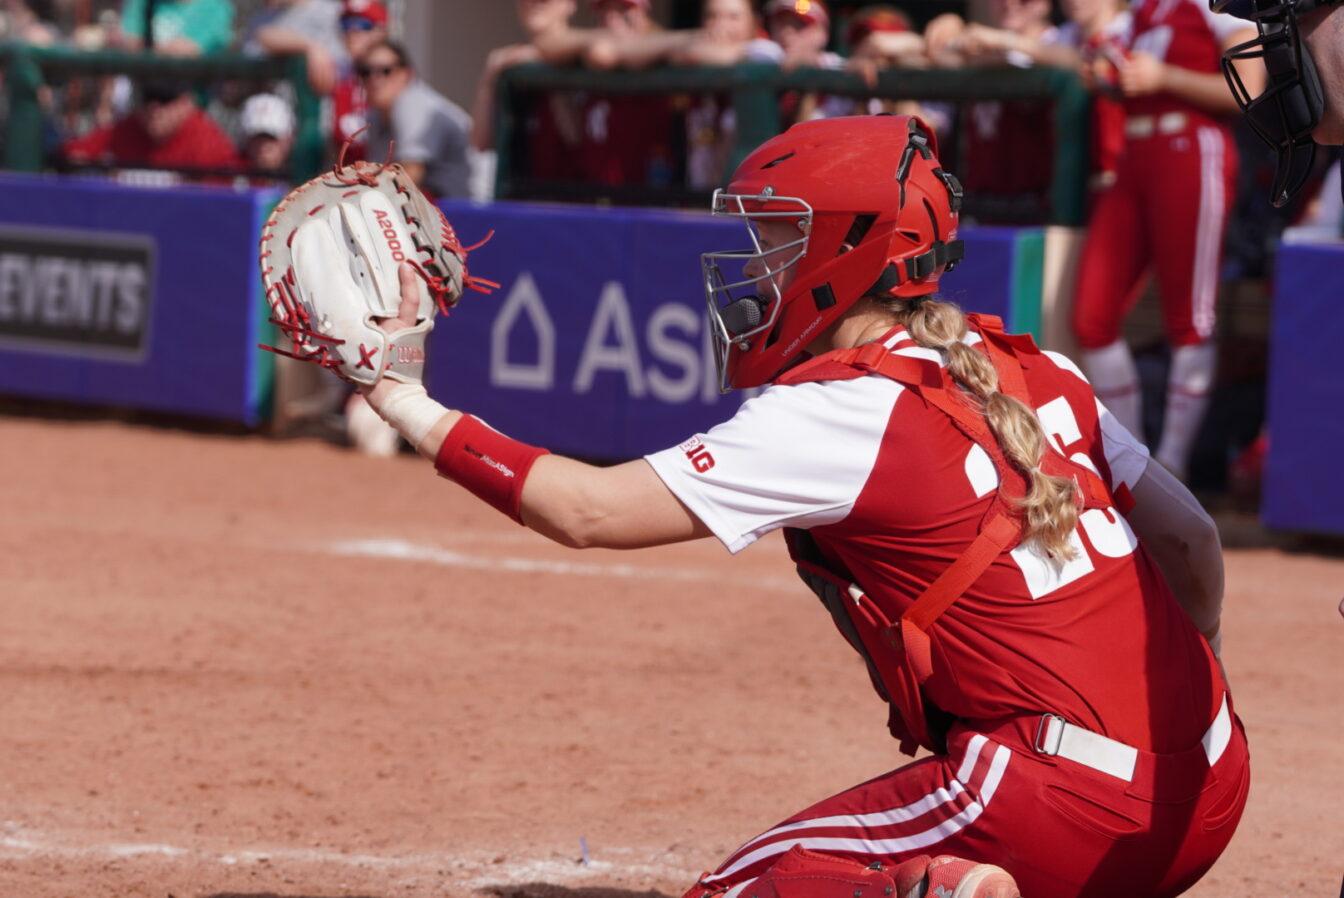 Softball: Wisconsin drops two close games against SEC opponents in day one of Clearwater Invitational